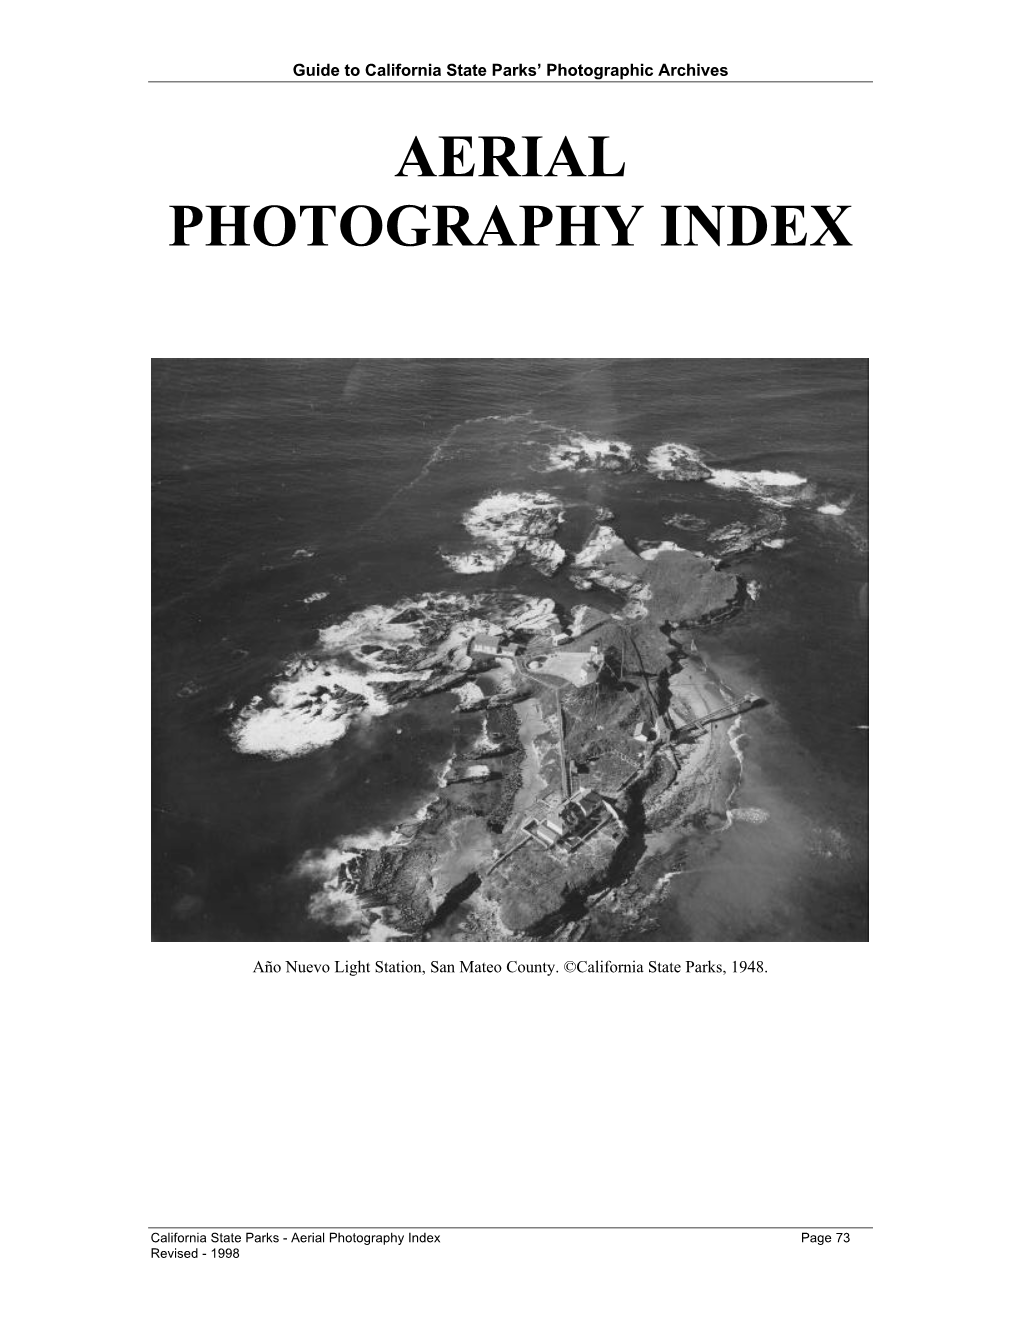 Aerial Photography Index